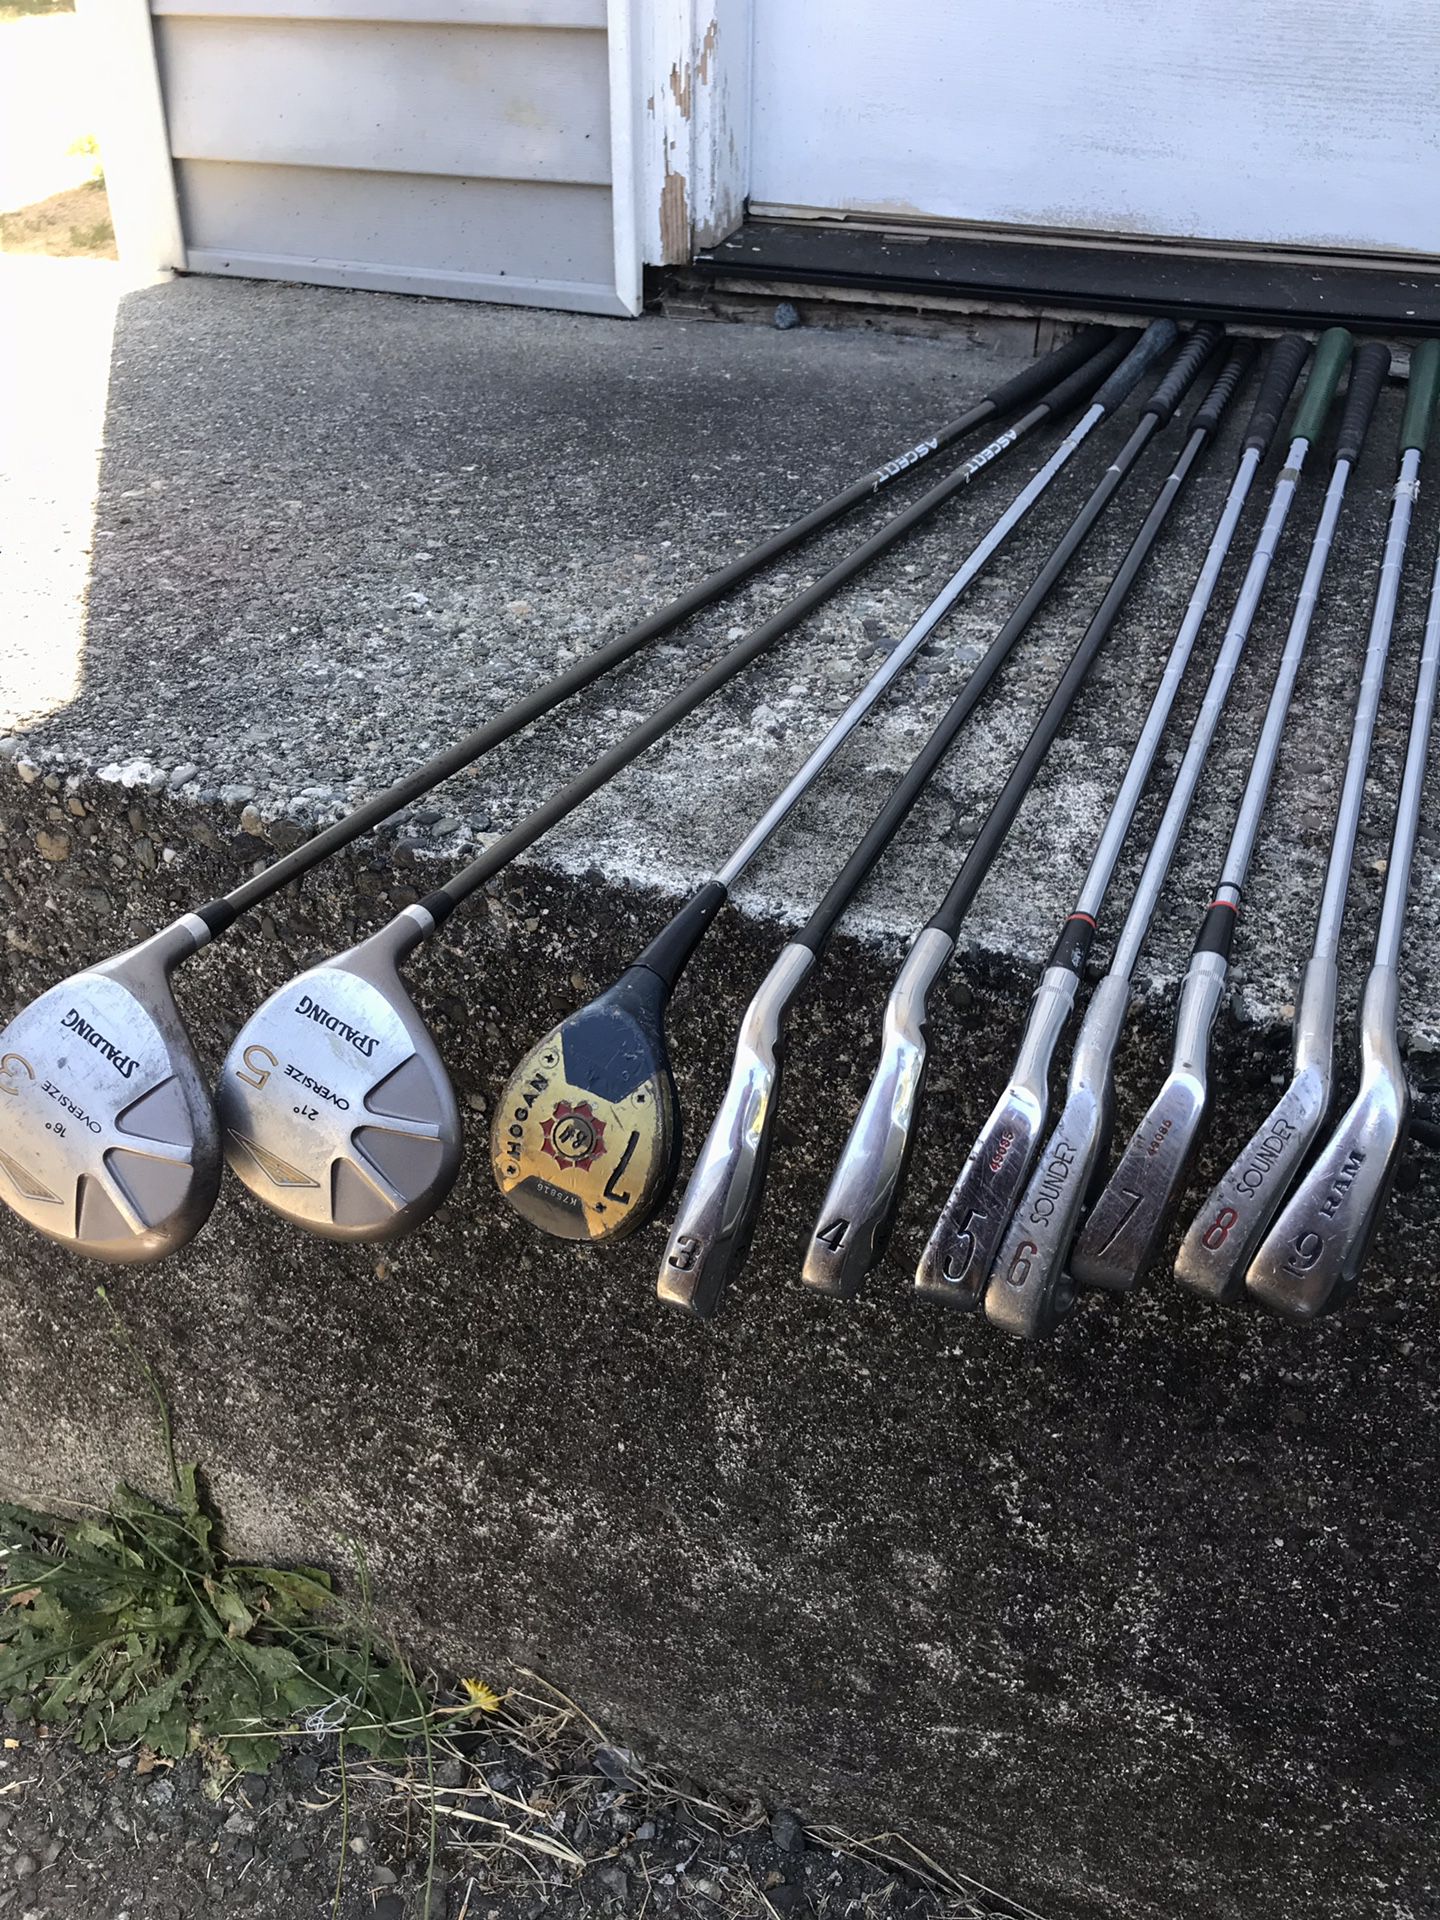 Complete set of assorted Golf Clubs